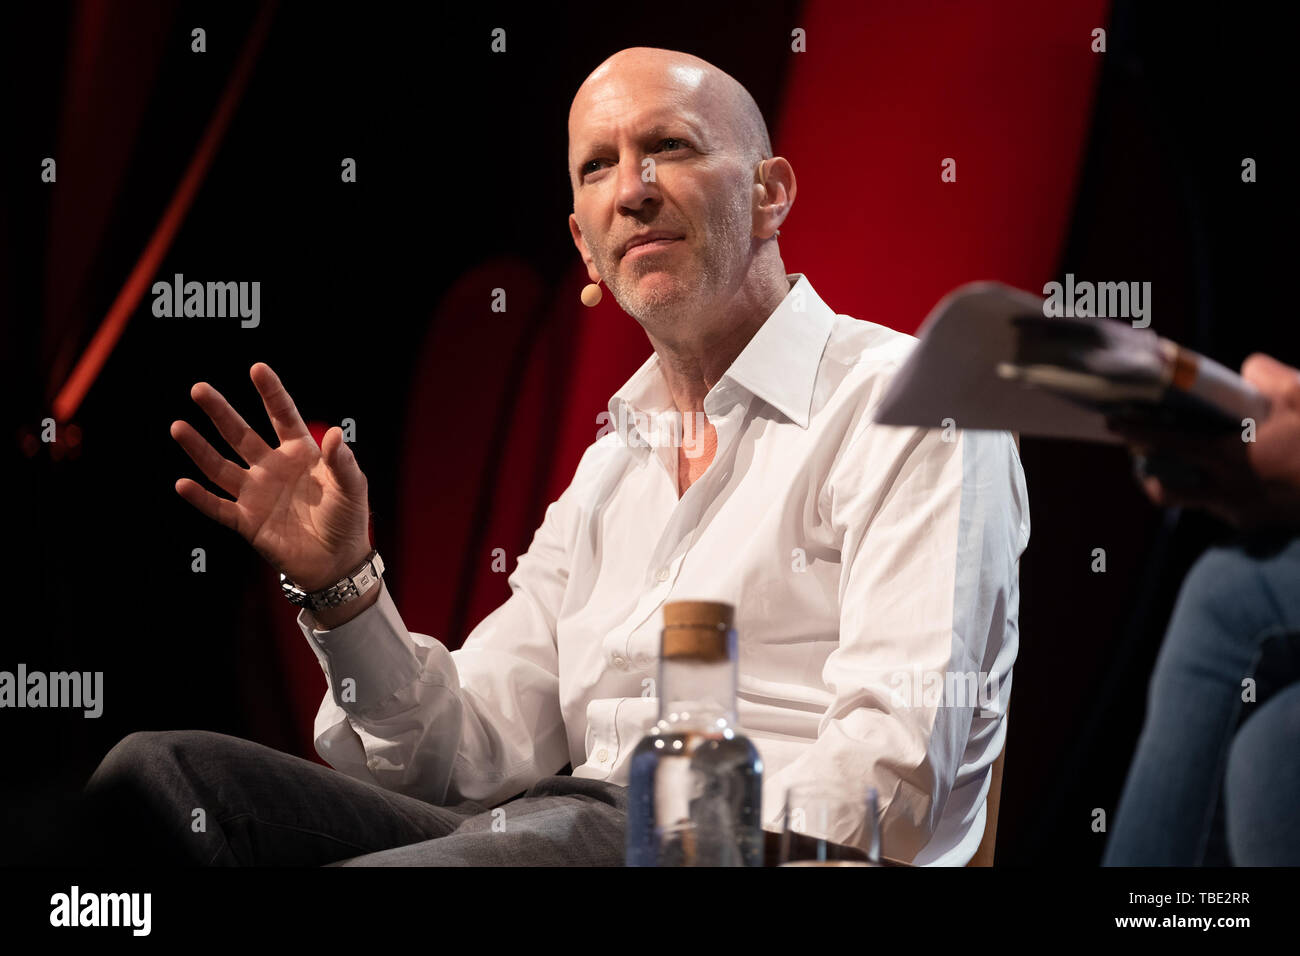 The Hay Festival, Hay on Wye, Wales UK , Saturday 01 June 2019.   Simon Sebag Montefiore, historian and writer, on stage  at the 2019 Hay Festival   The festival, now in its 32nd year, held annually in the small town of Hay on Wye on the Wales - England border,  attracts the finest writers, politicians and intellectuals from  across the globe for 10 days of talks and discussions, celebrating the best of the written word and critical debate  Photo © Keith Morris / Alamy Live News Stock Photo